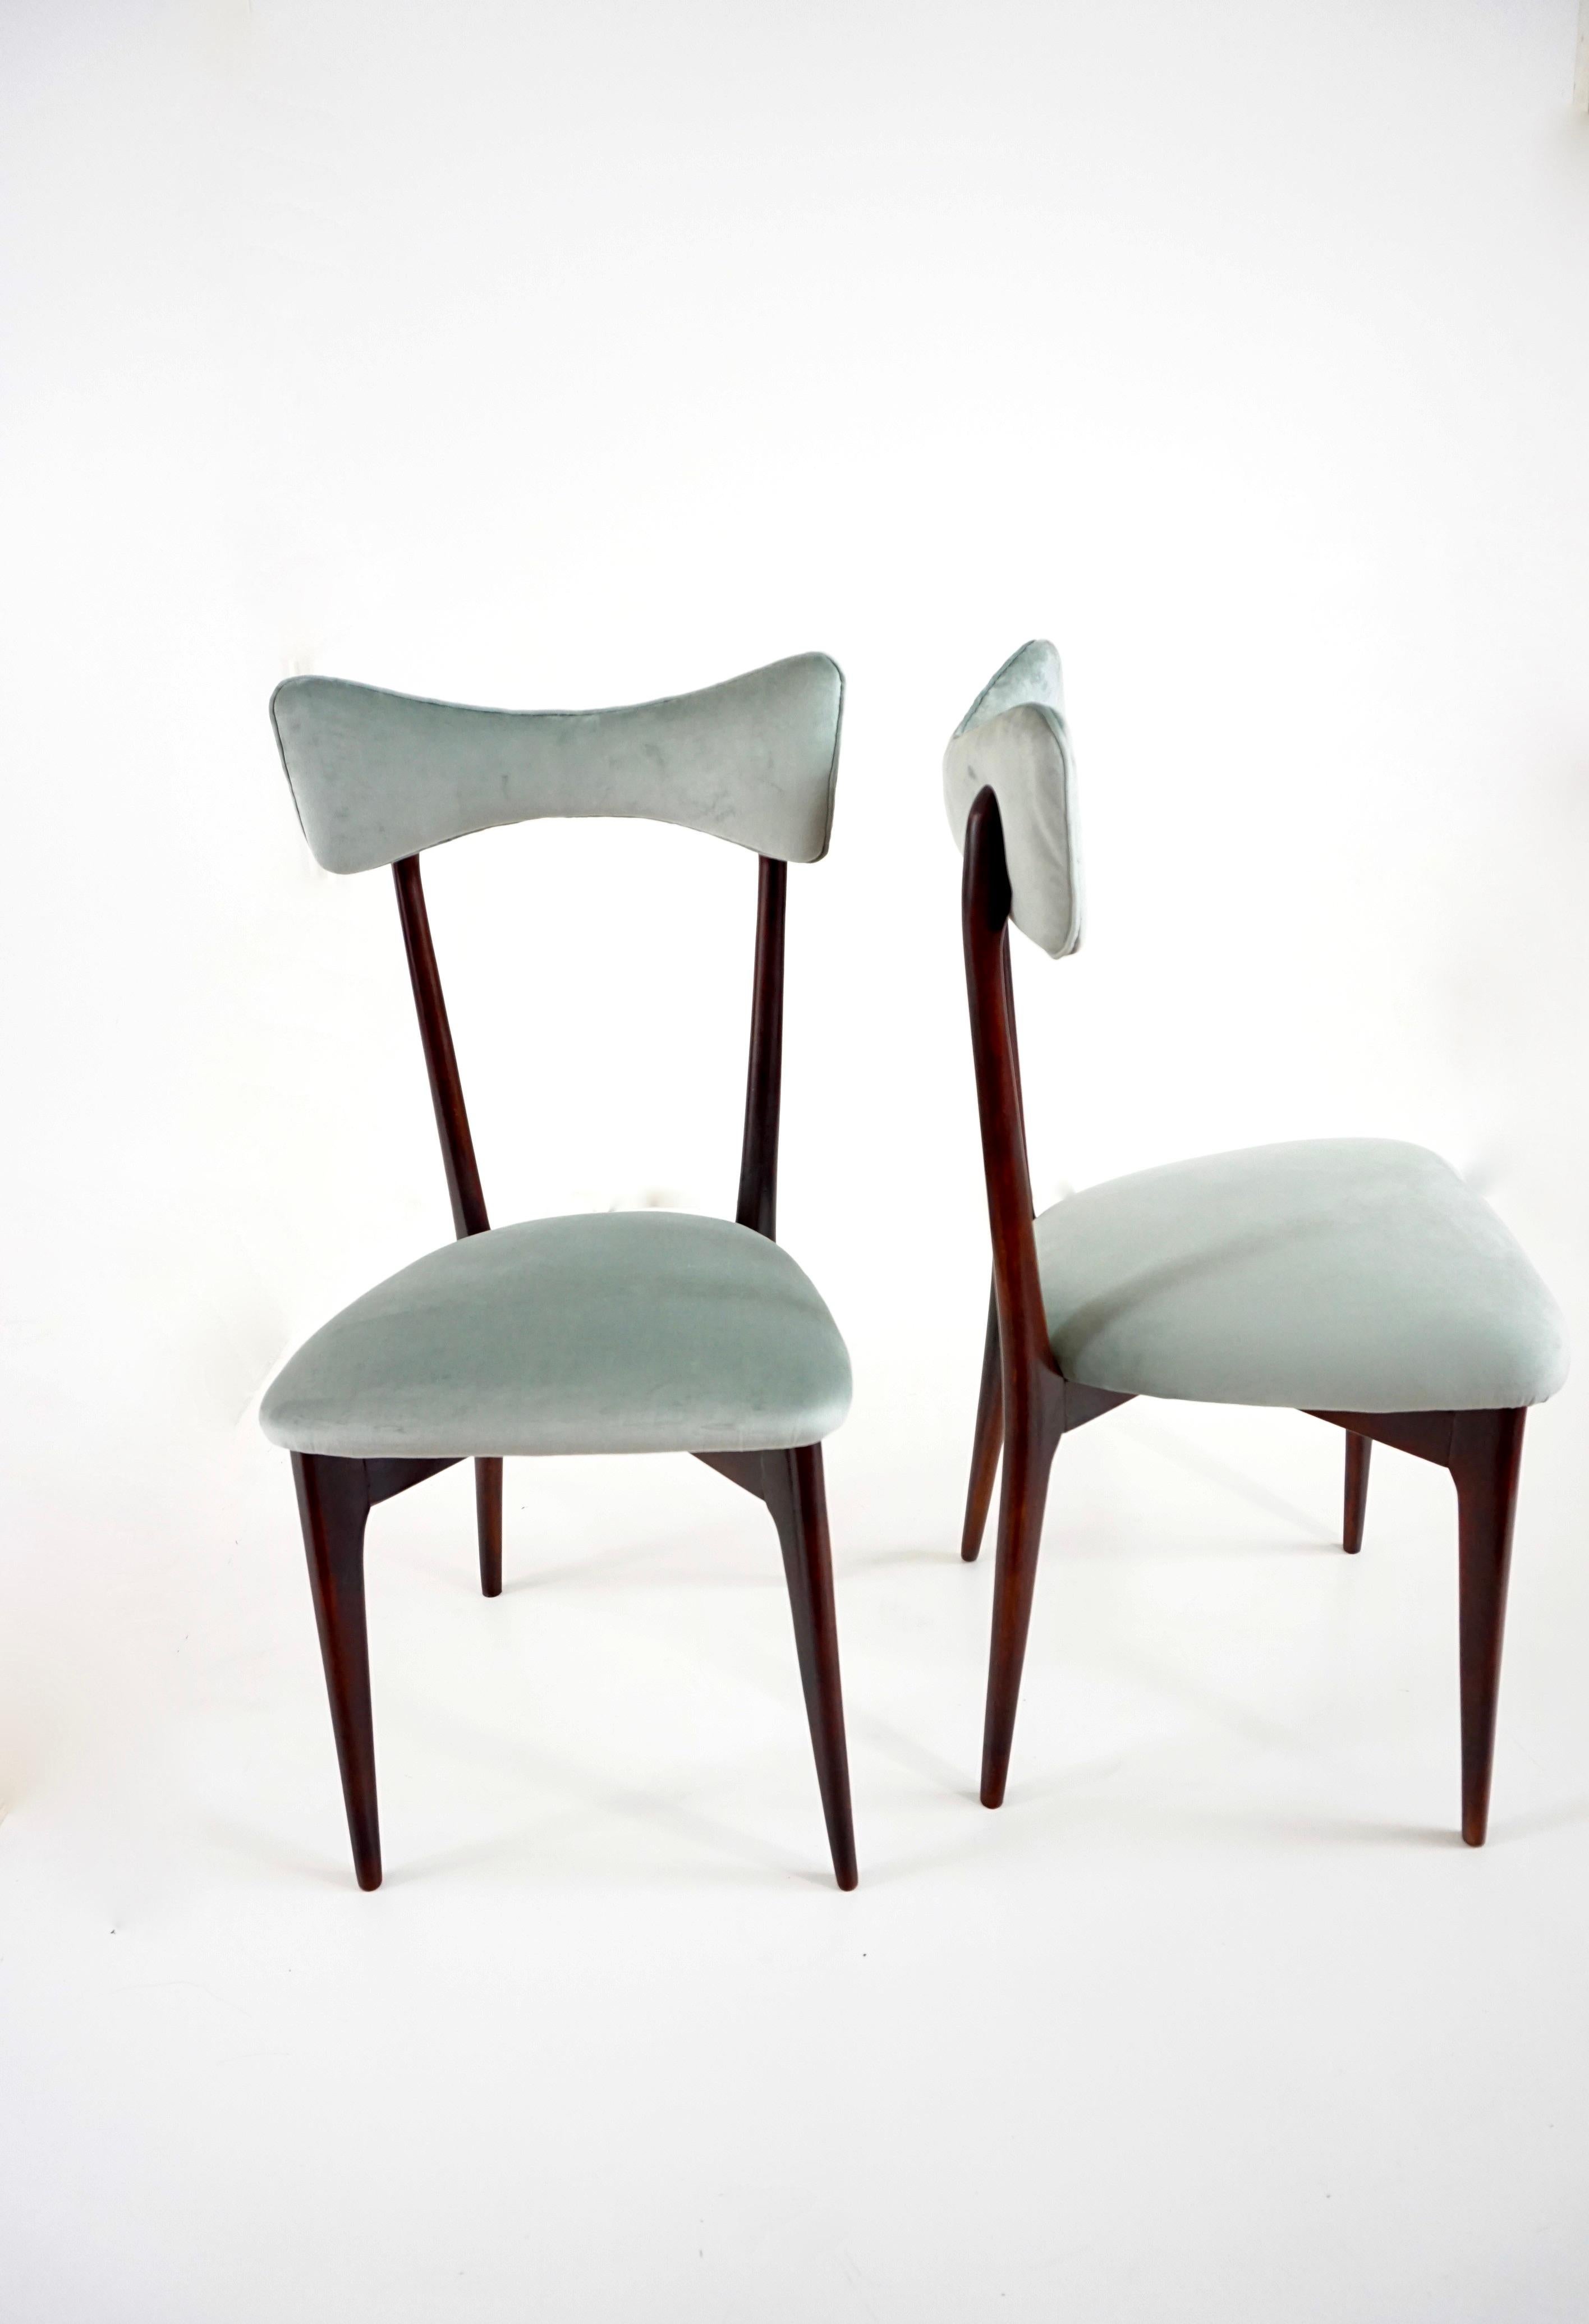 Italian Set of Six Ico and Luisa Parisi Dining Chairs by Ariberto Colombo, 1952 For Sale